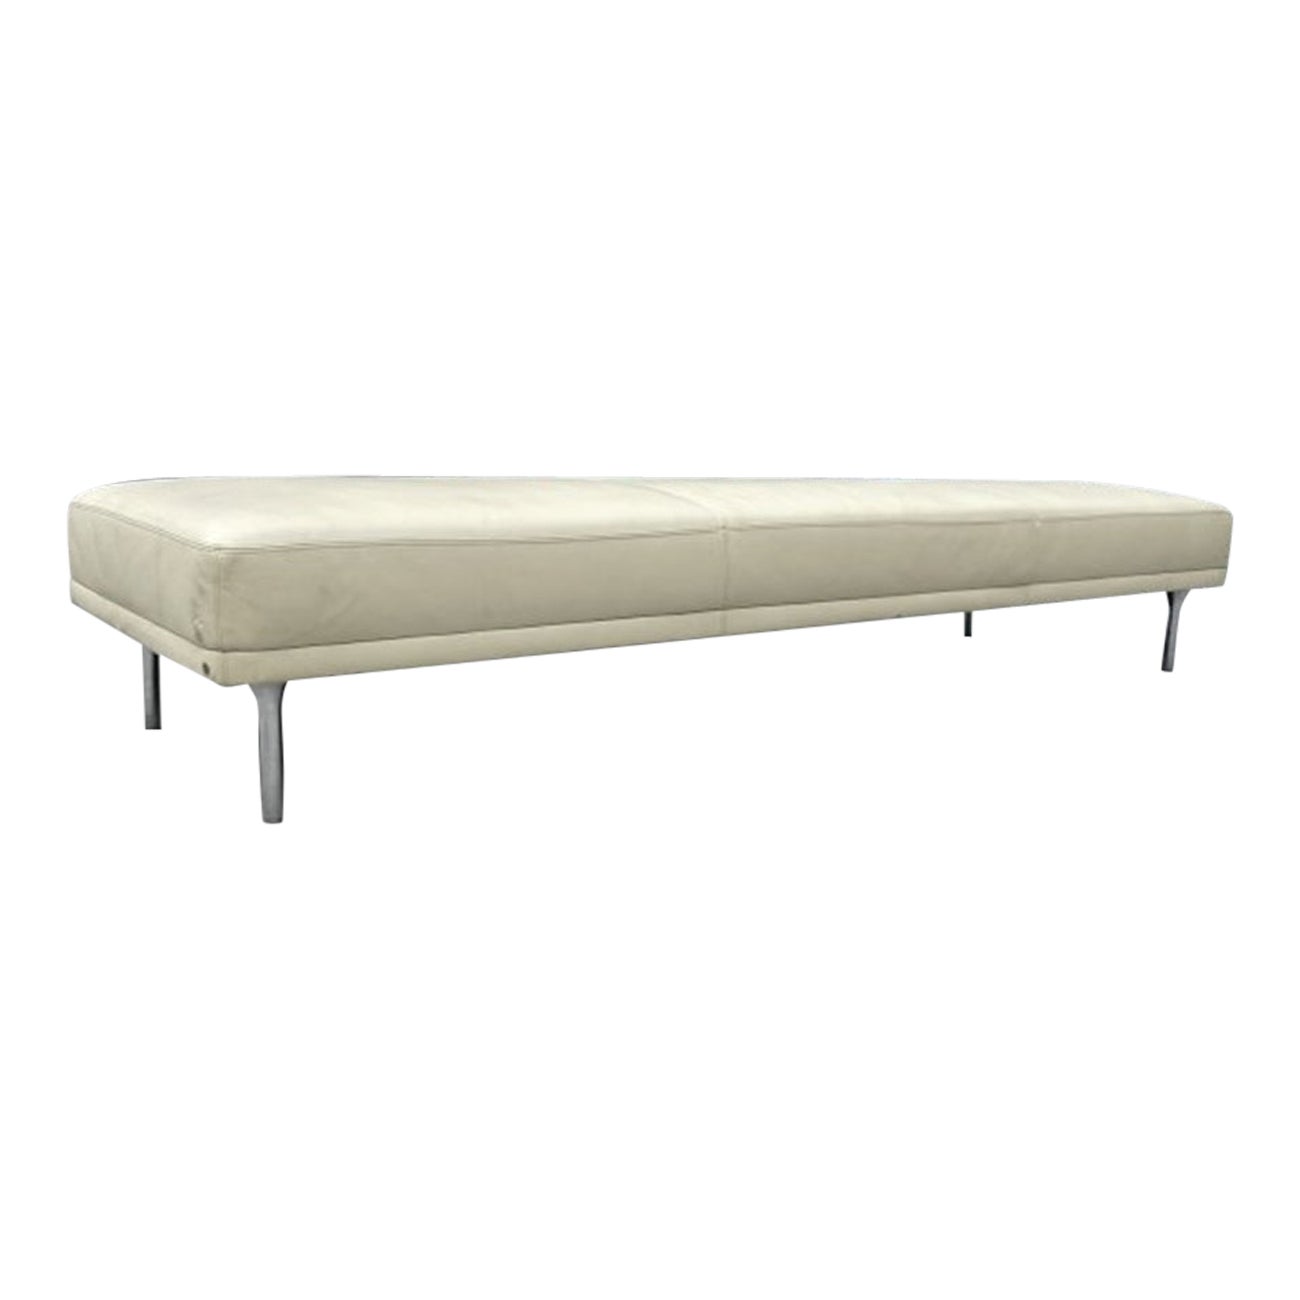 Stunning Bench with Stainless Steel Round Legs & Leather Upholstery For Sale